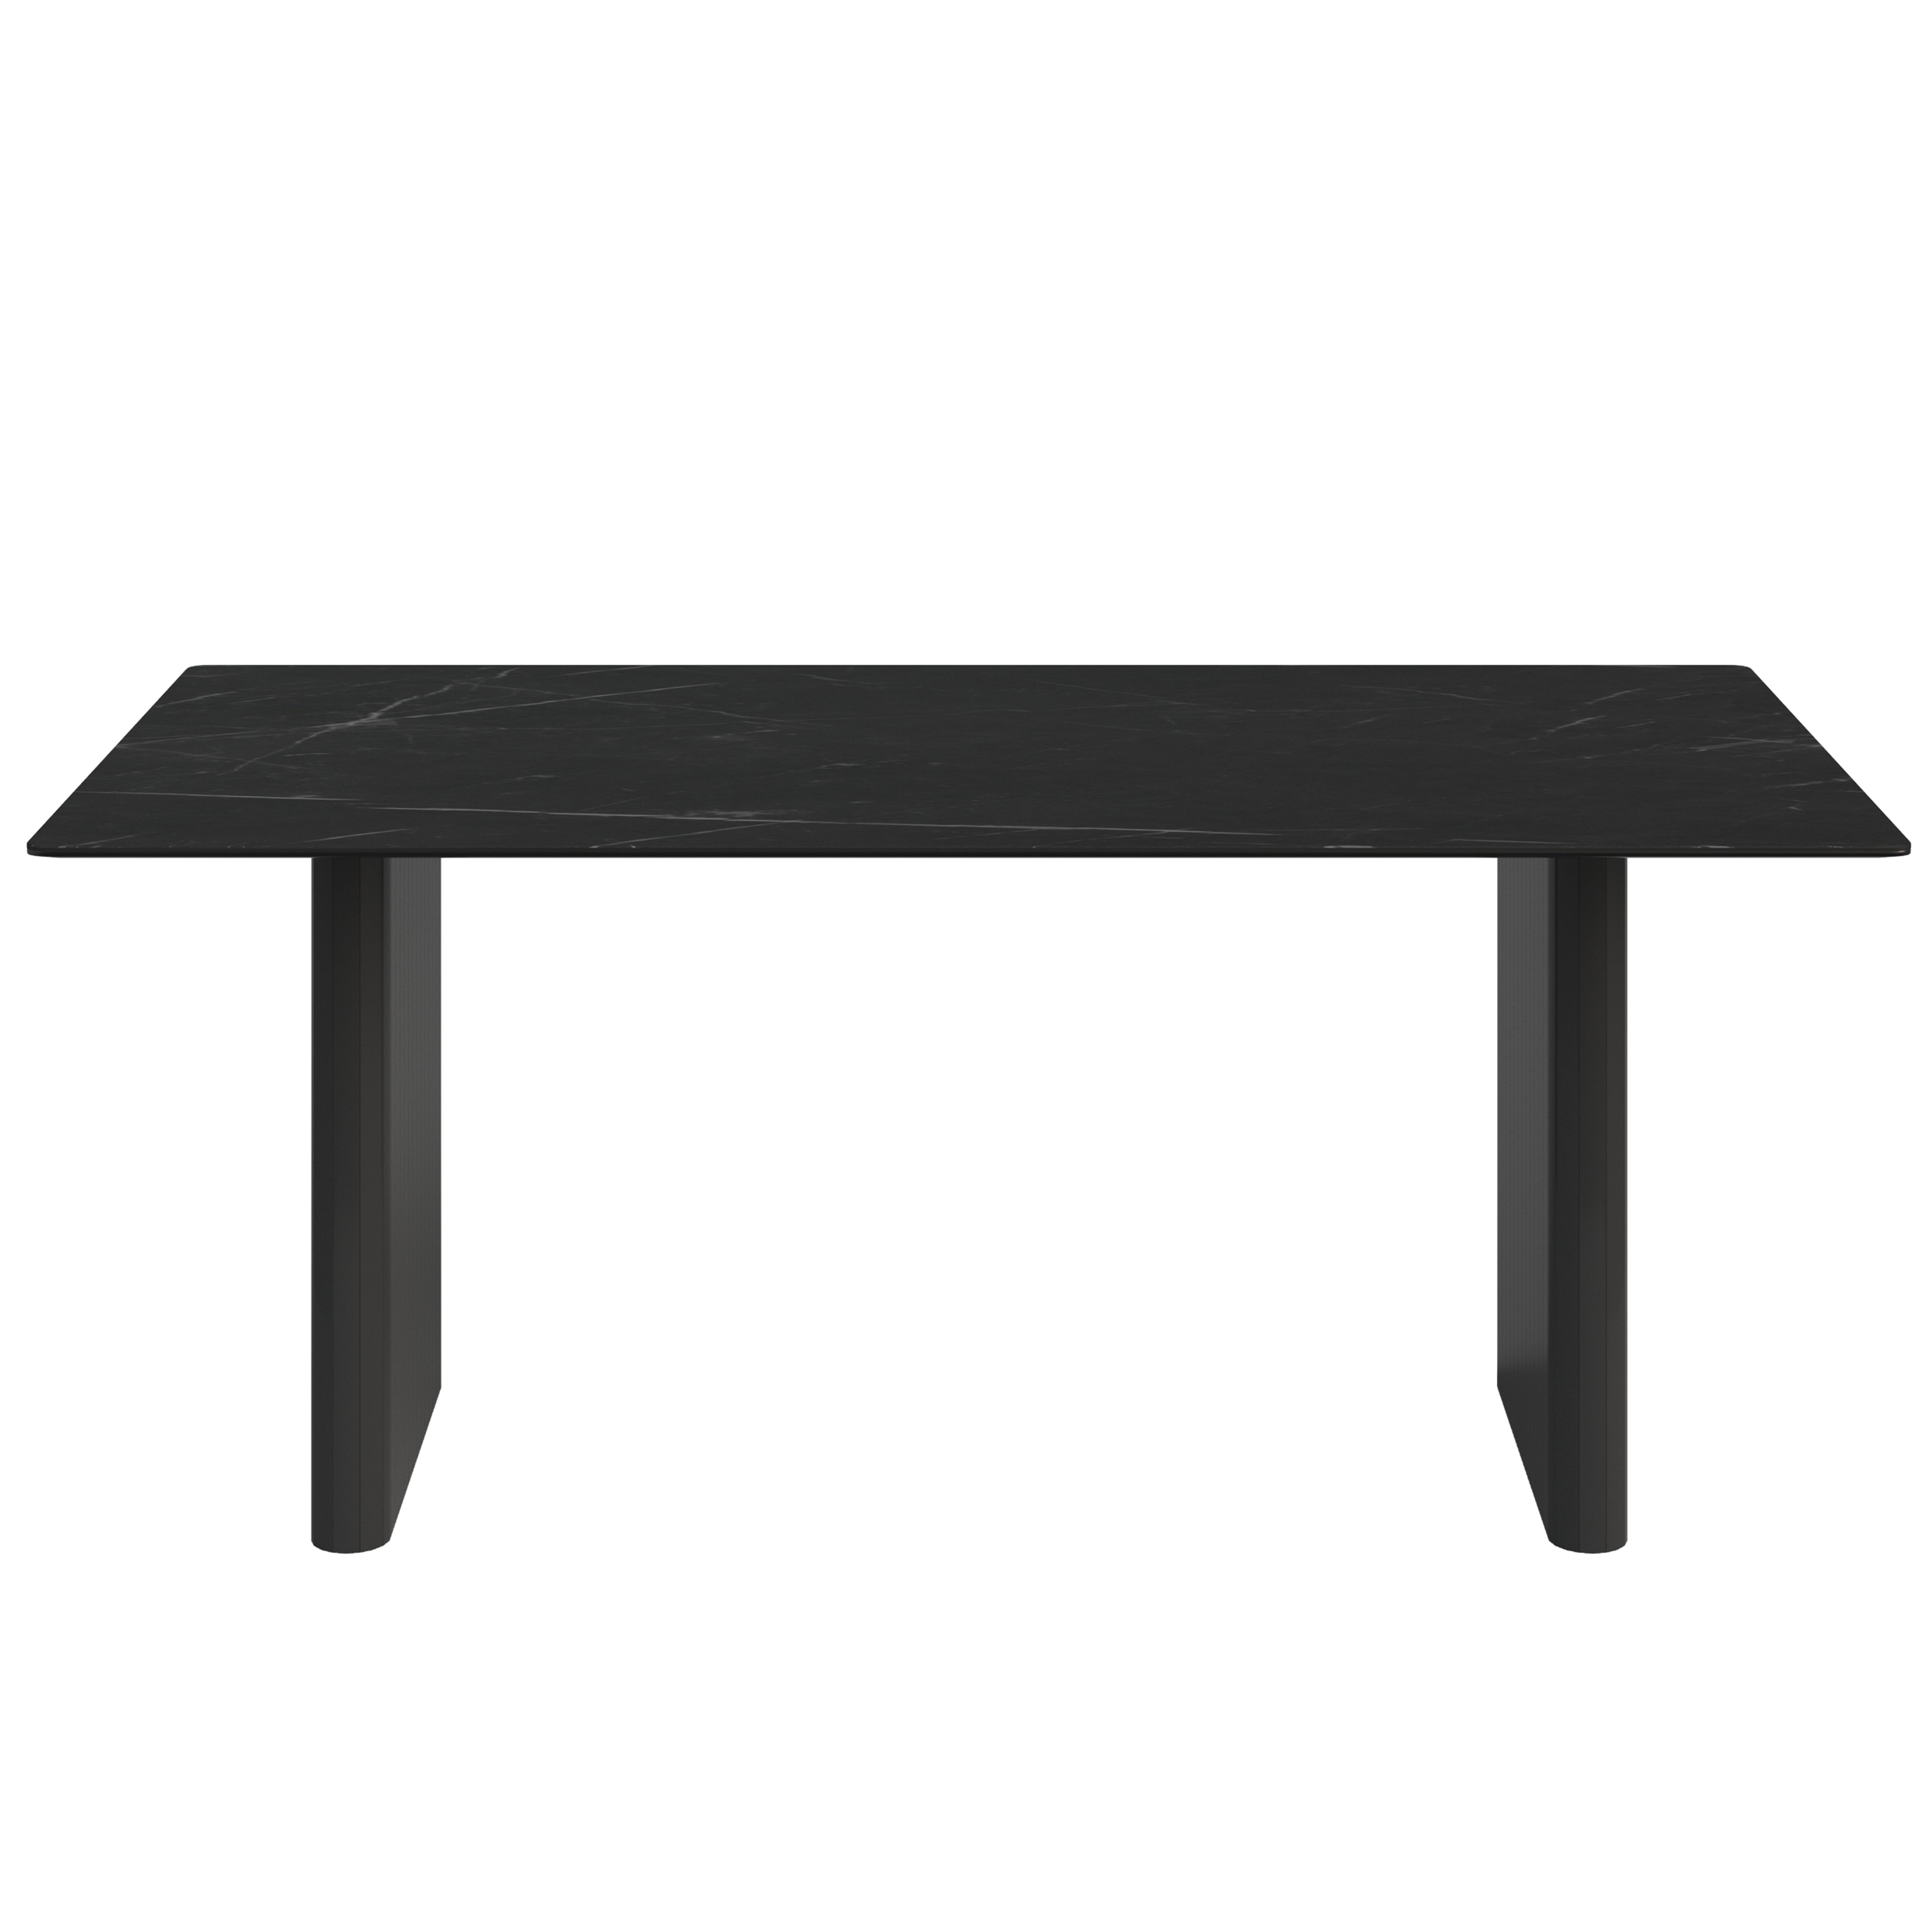 Kles - Stone Dining Table